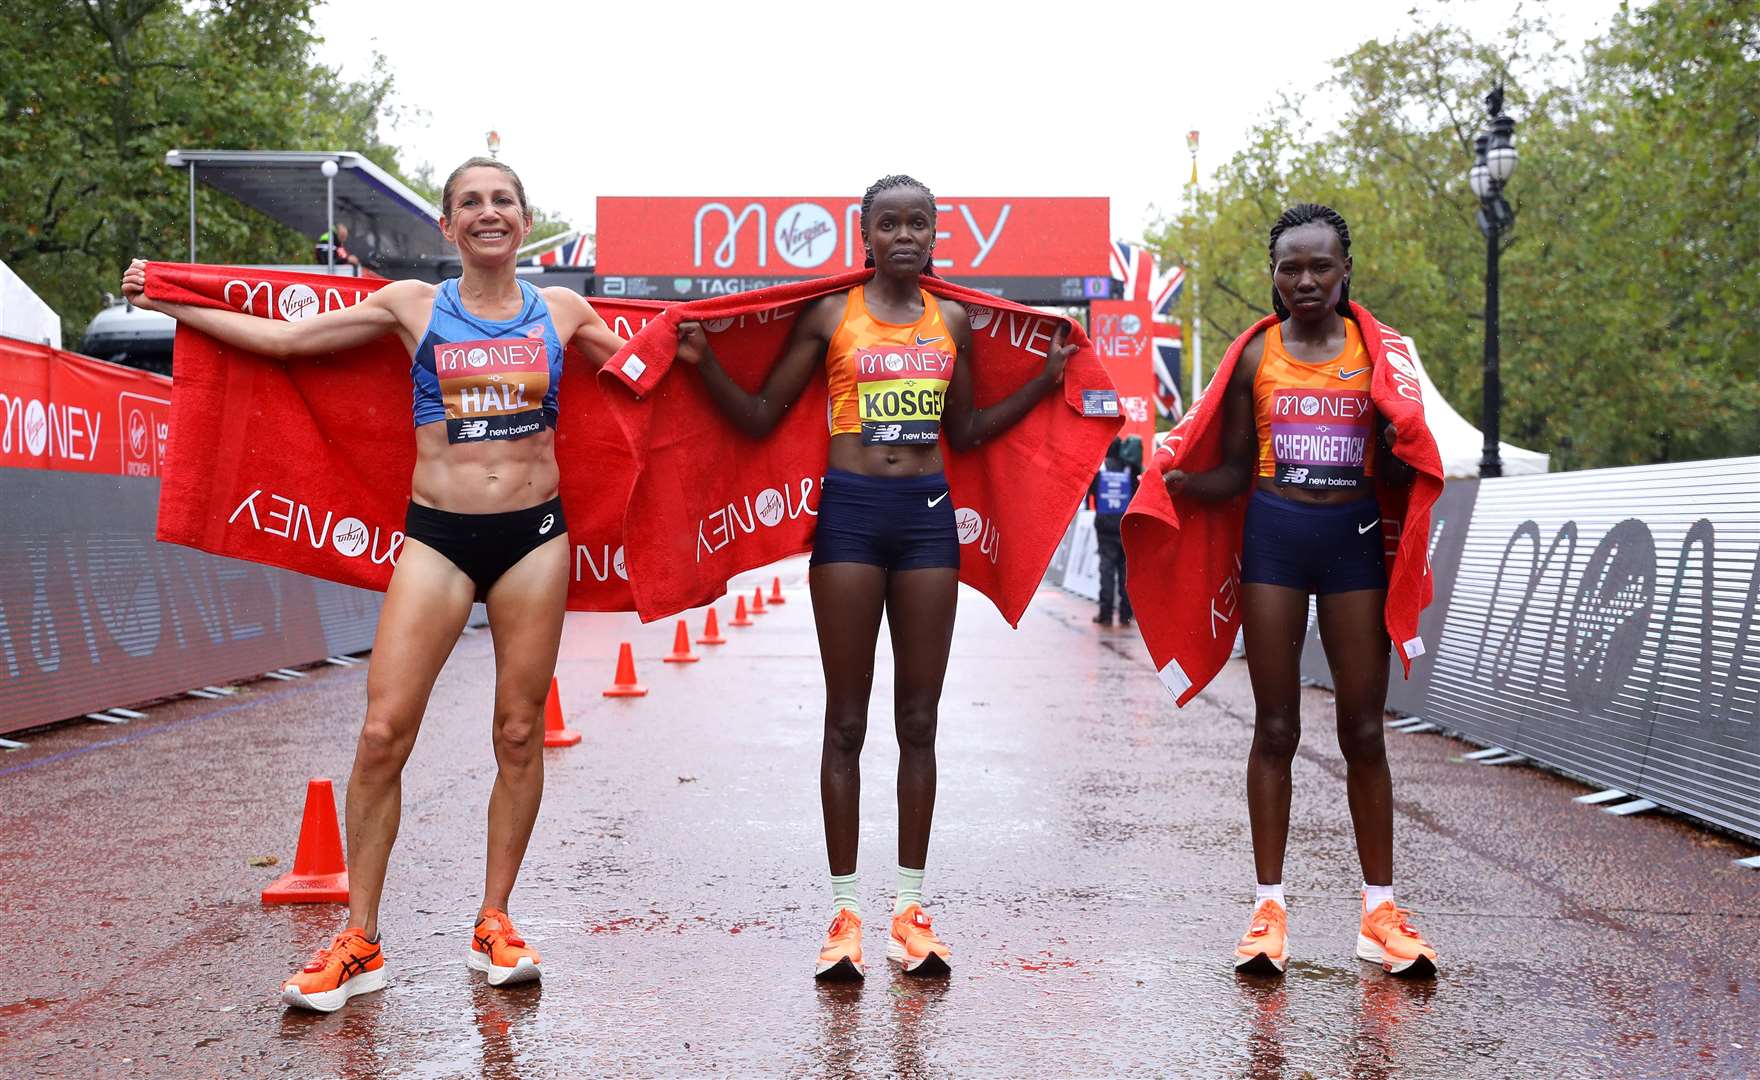 Kenya’s Brigid Kosgei (centre) celebrates winning the elite women’s race alongside second-placed Sara Hall from the USA (left) and Kenya’s Ruth Chepngetich, who came third (Richard Heathcoate/PA)